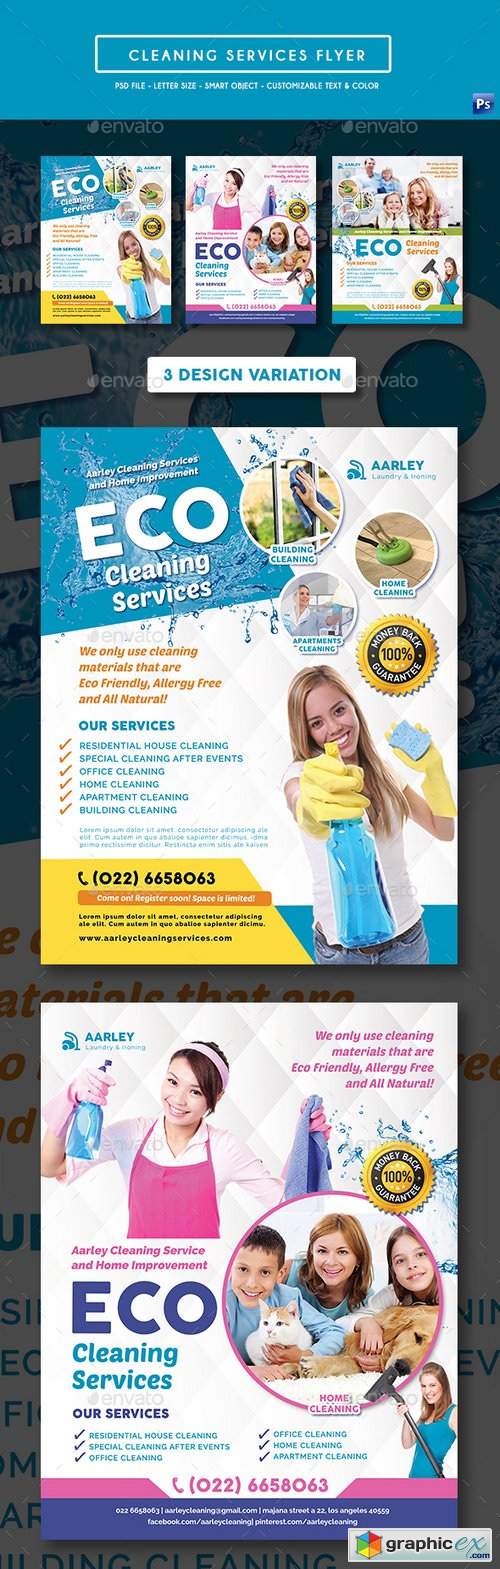 Cleaning Services Flyer 19585464